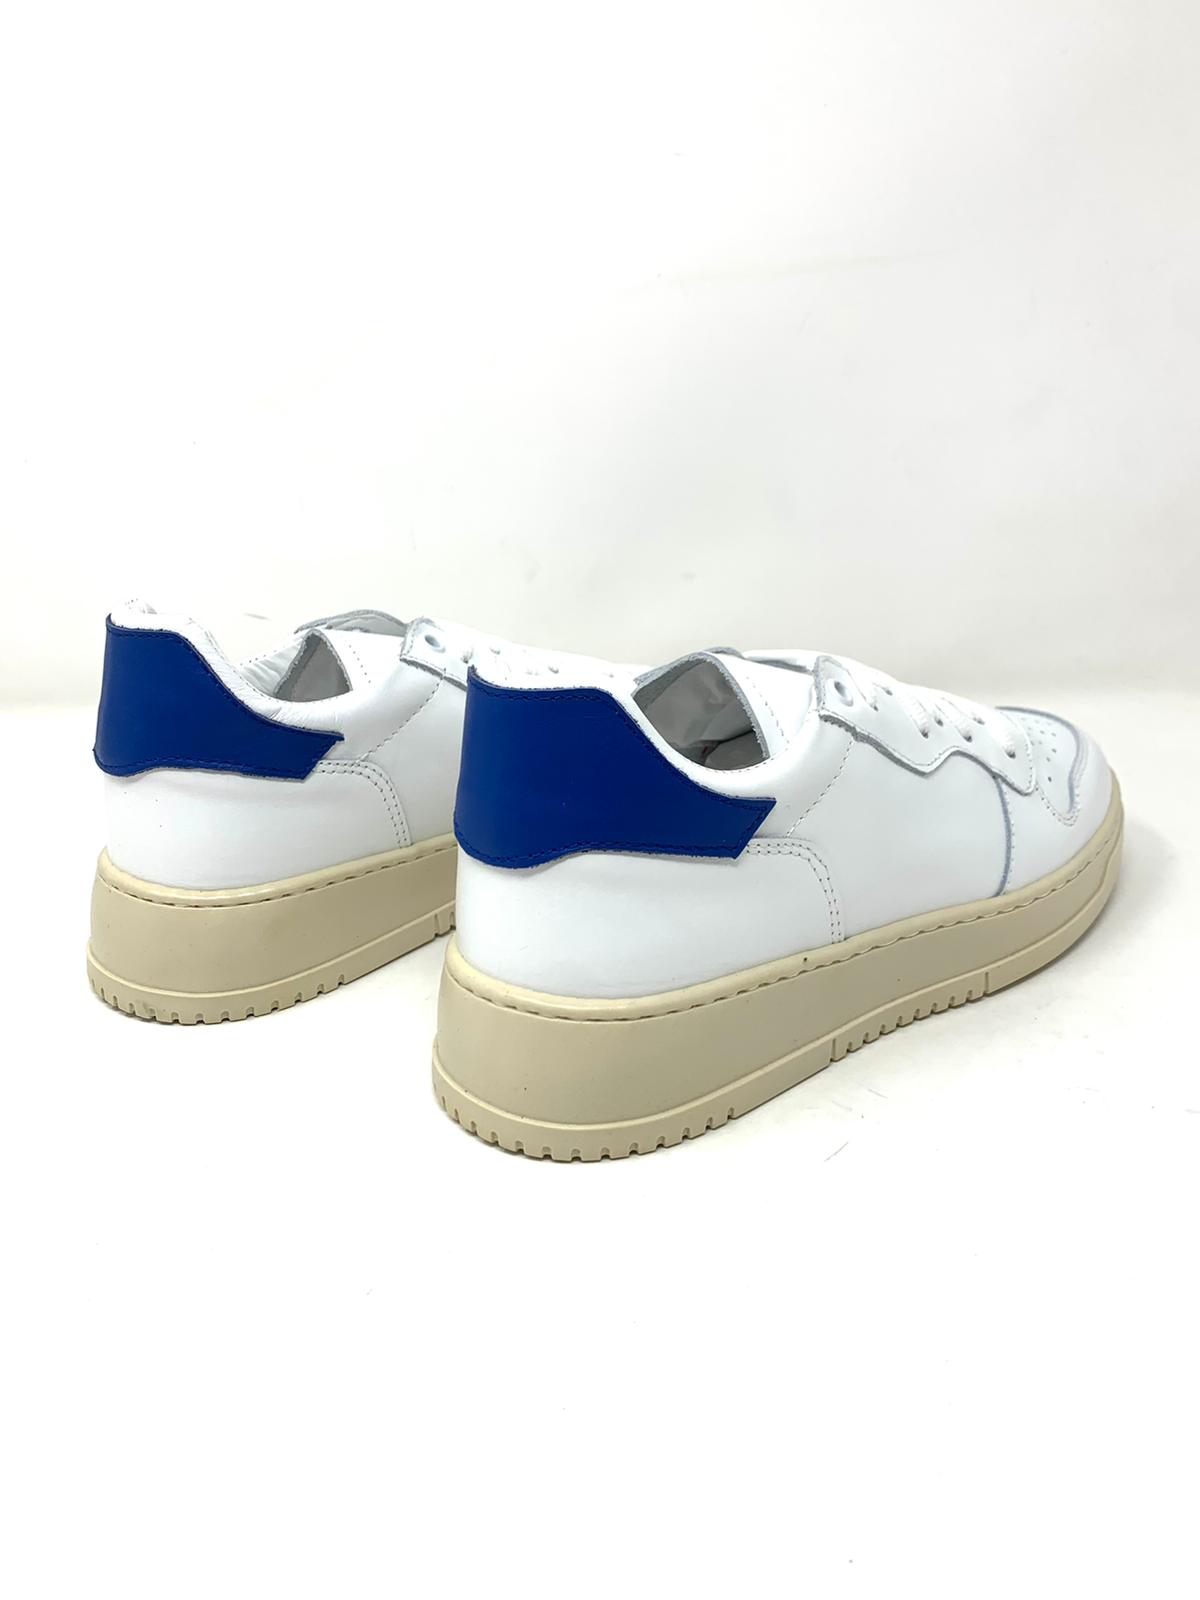 Two-tone genuine leather sneakers made in Italy